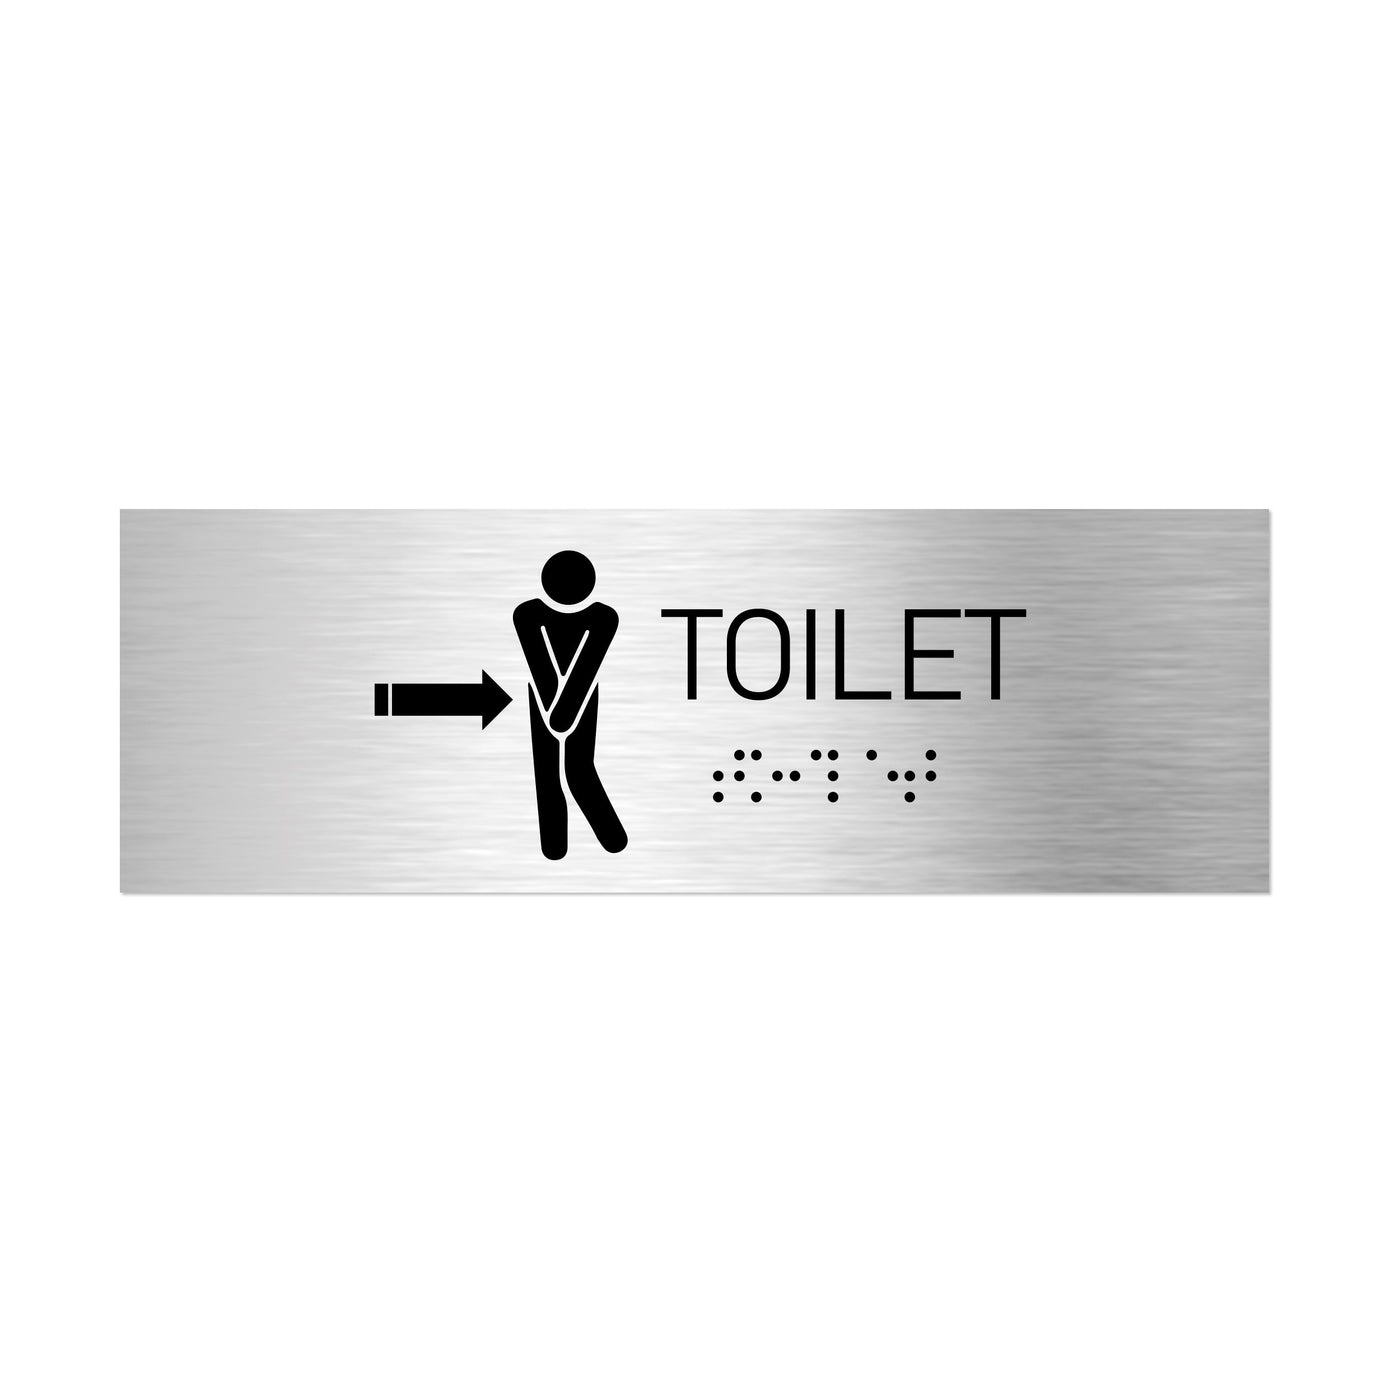 Bathroom Signs - Men Toilet Signs With Braille - Stainless Steel